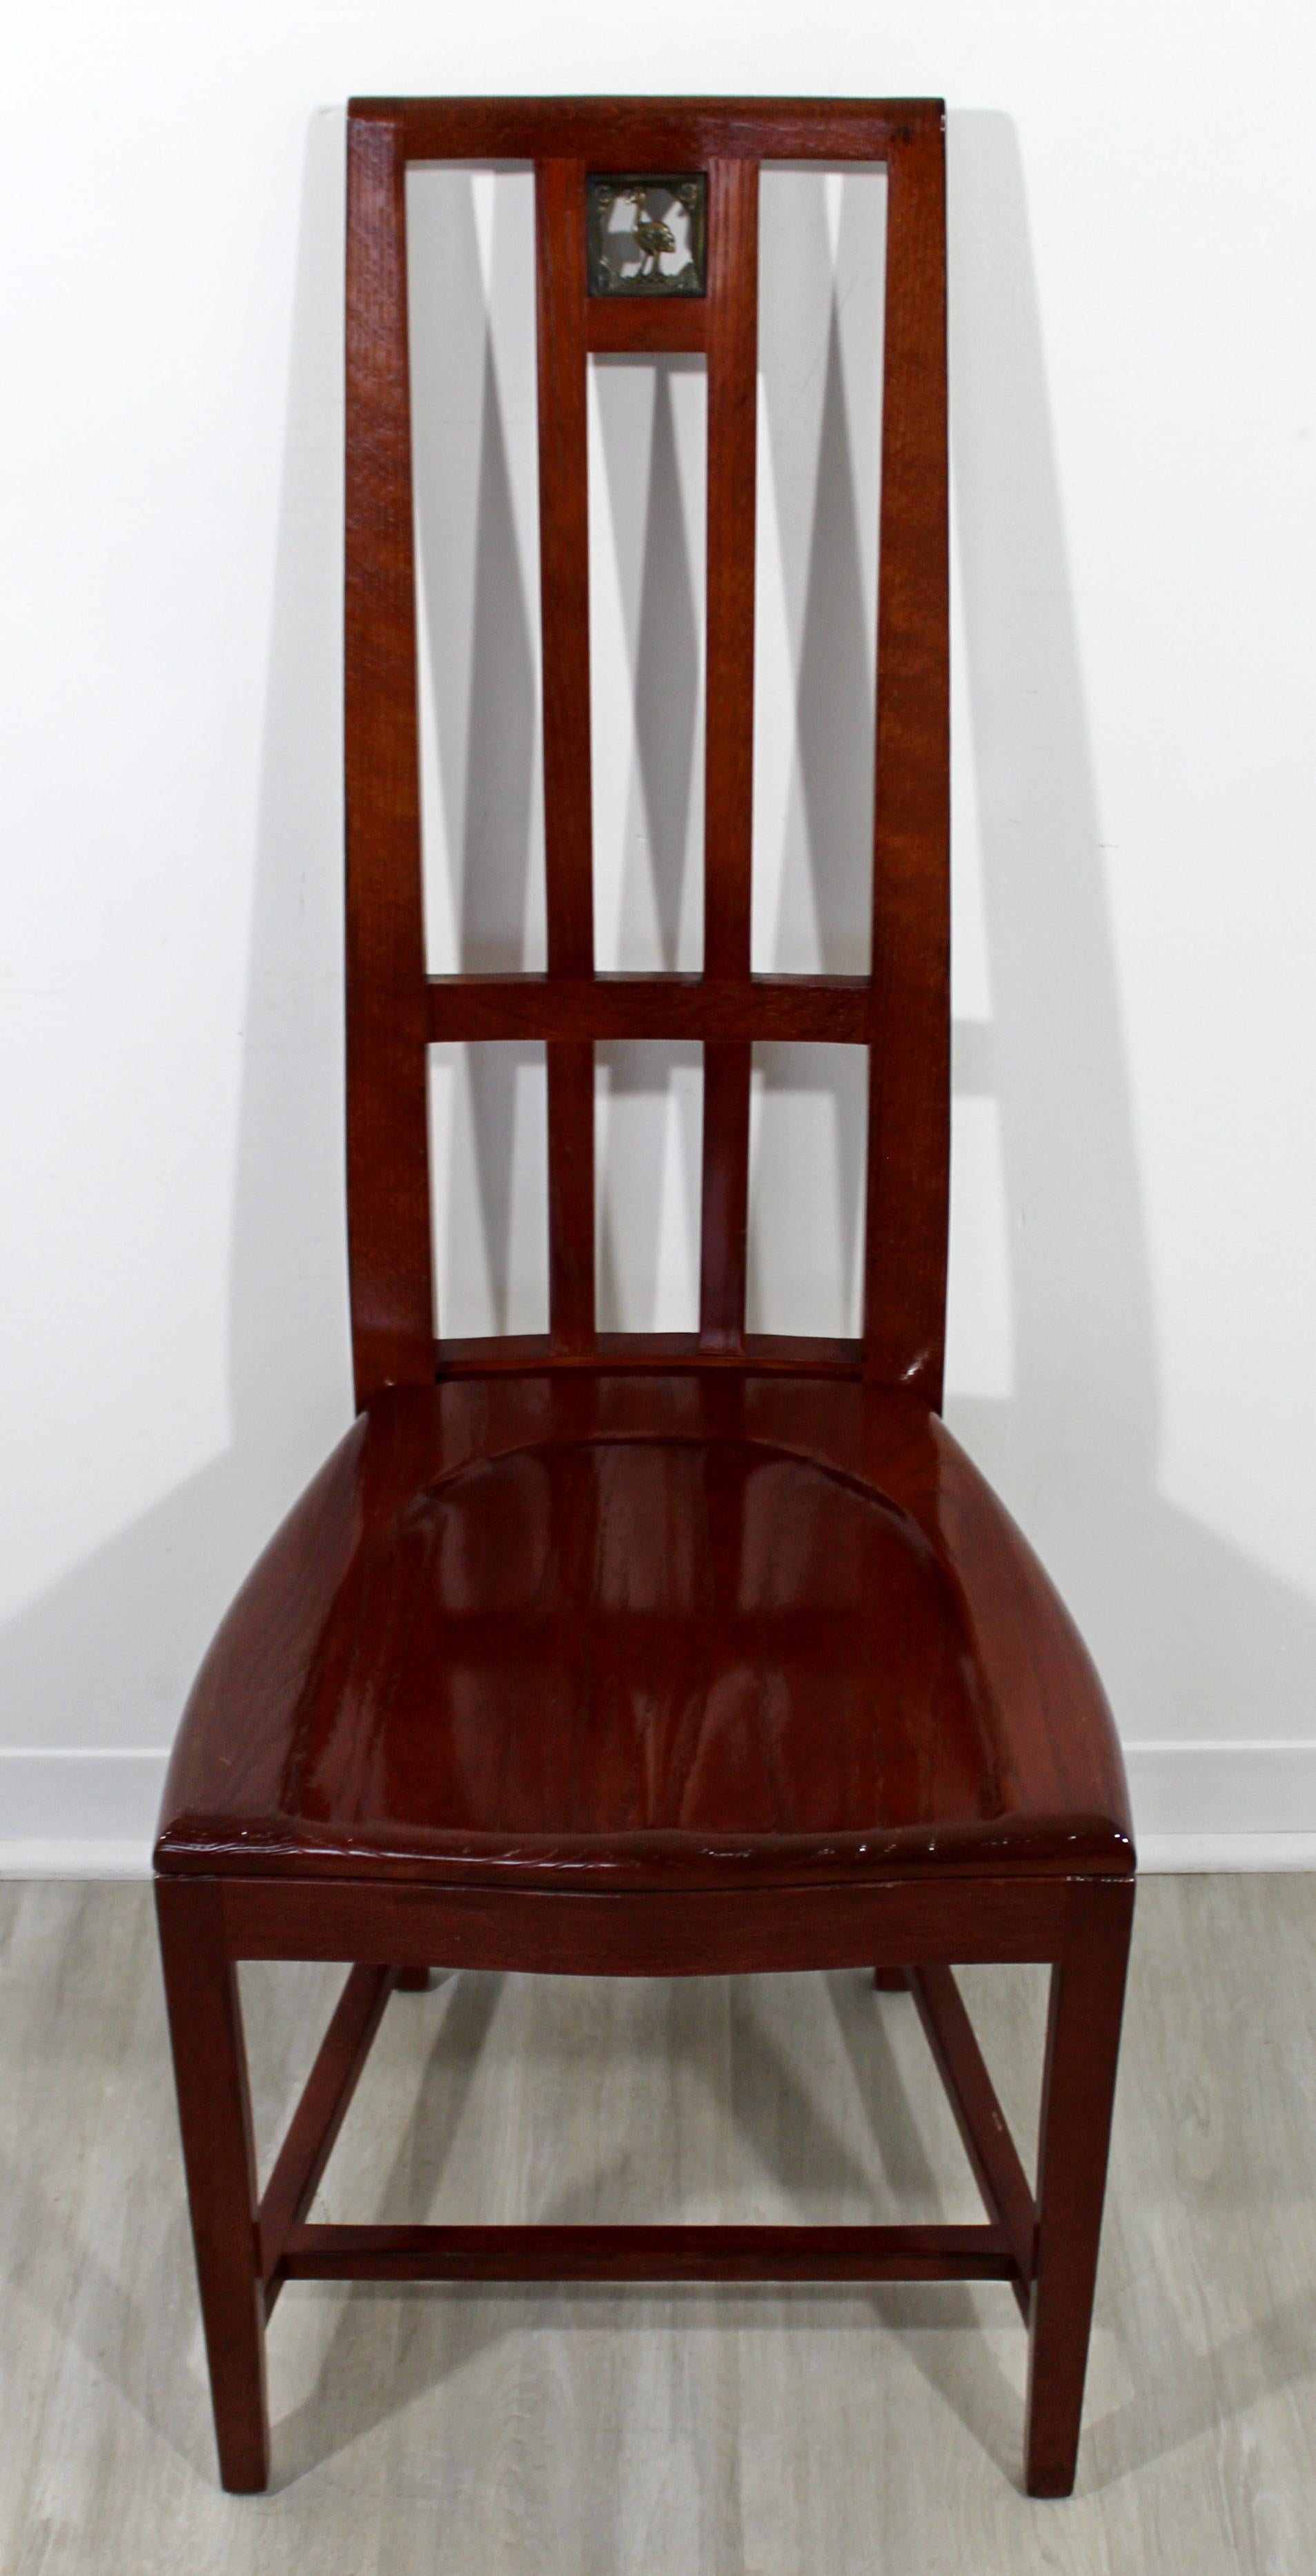 For your consideration is a stunning set of eight, traditional style, side dining chairs, by Eero Saarinen called the Cranbrook dining chair. In excellent vintage condition. The dimensions are 17.5